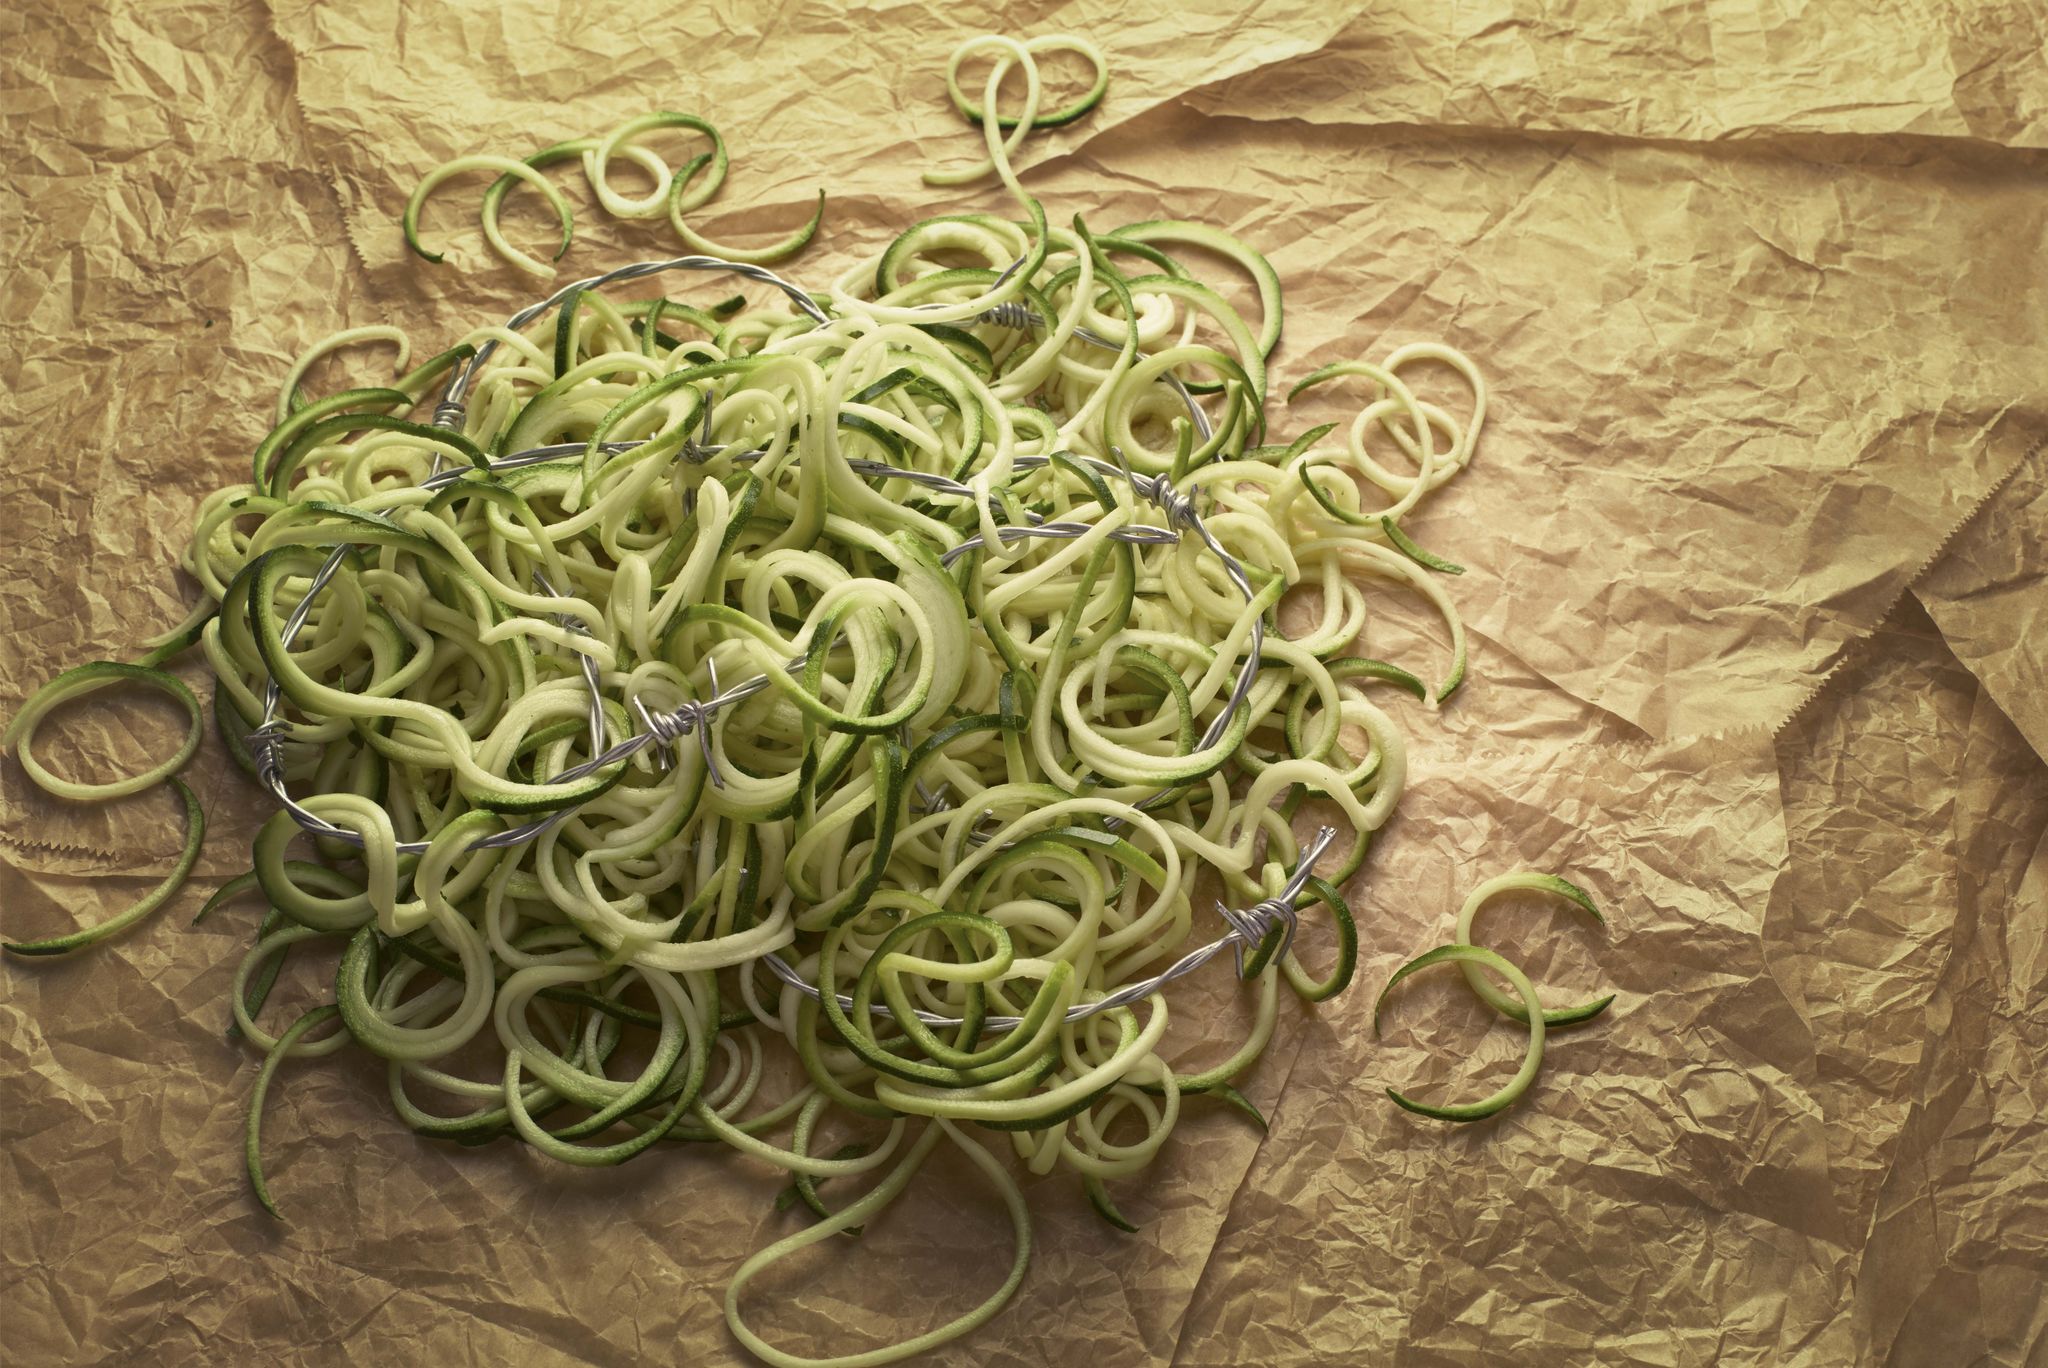 a pile of courgette spagettii courgetti on a brown paper bag with barbed wire running through it